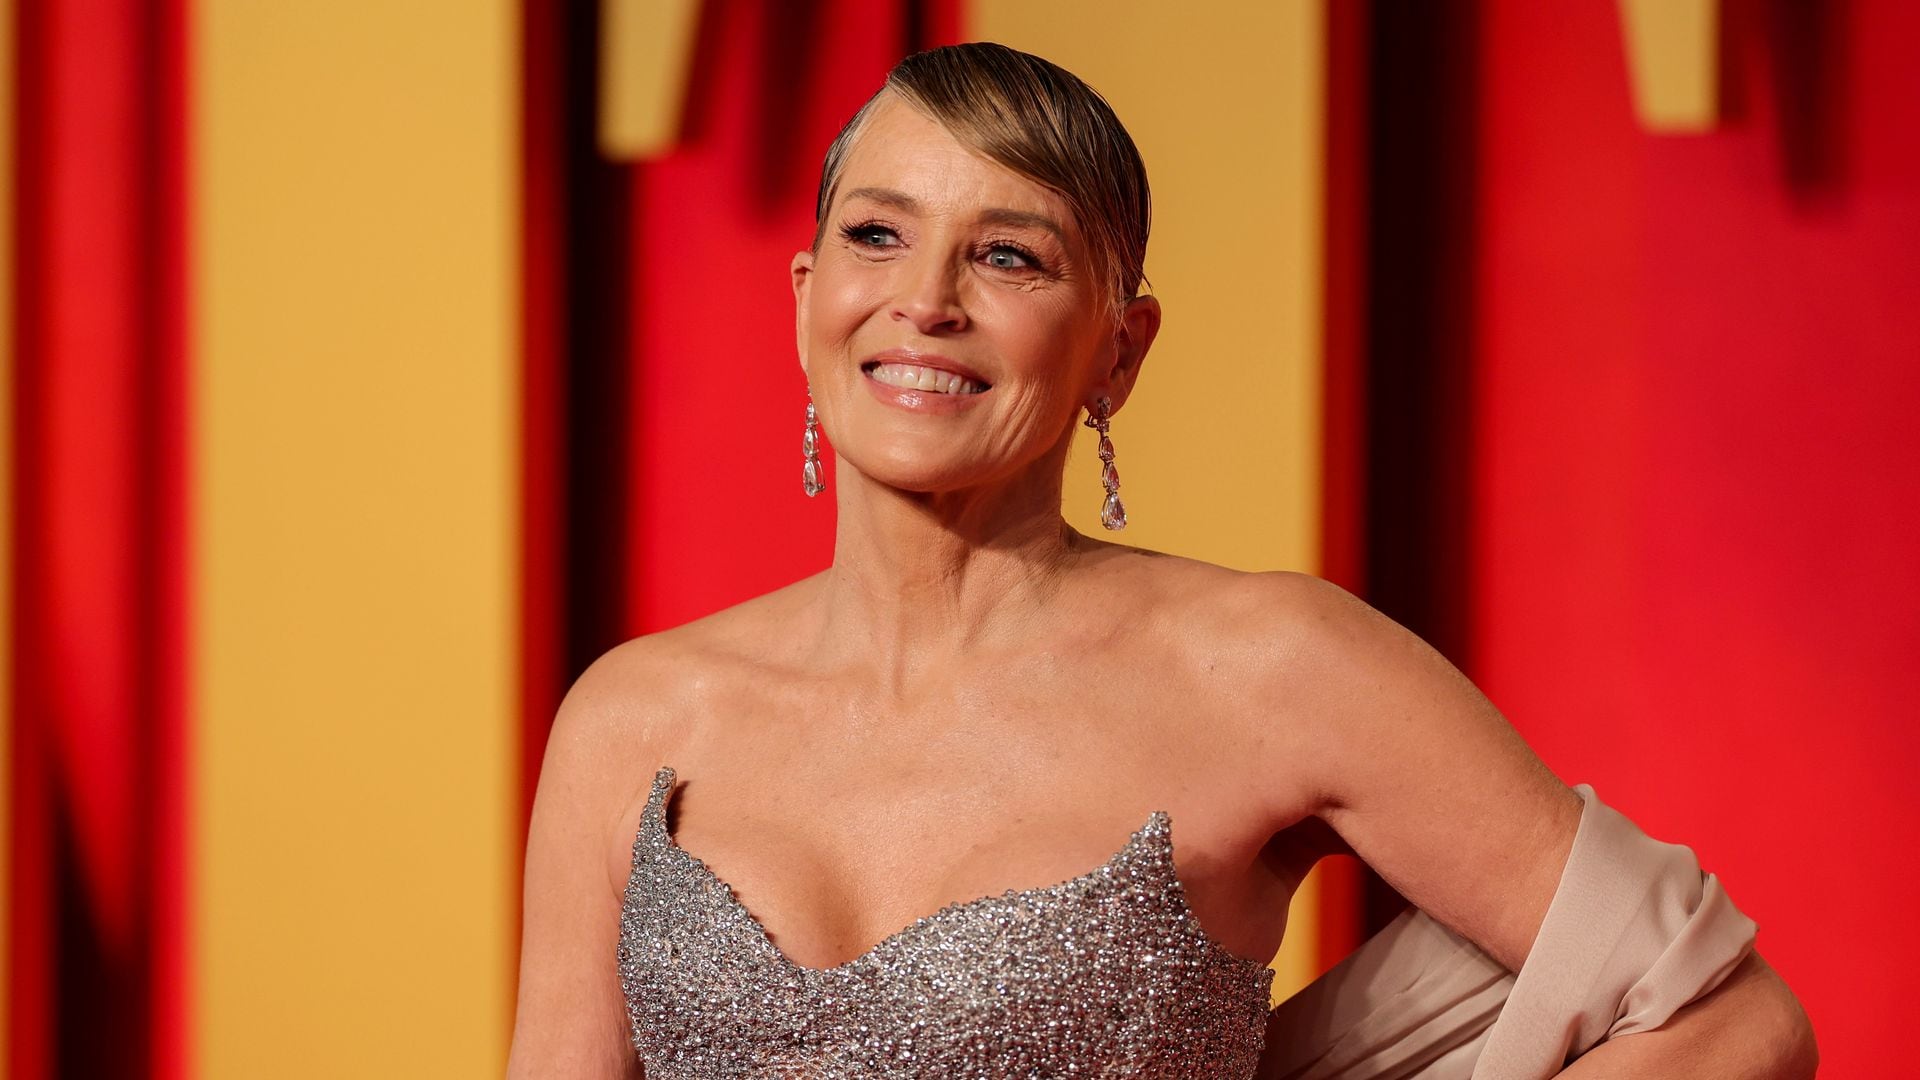 How Sharon Stone lost $18 million after suffering a stroke: 'It was all gone'